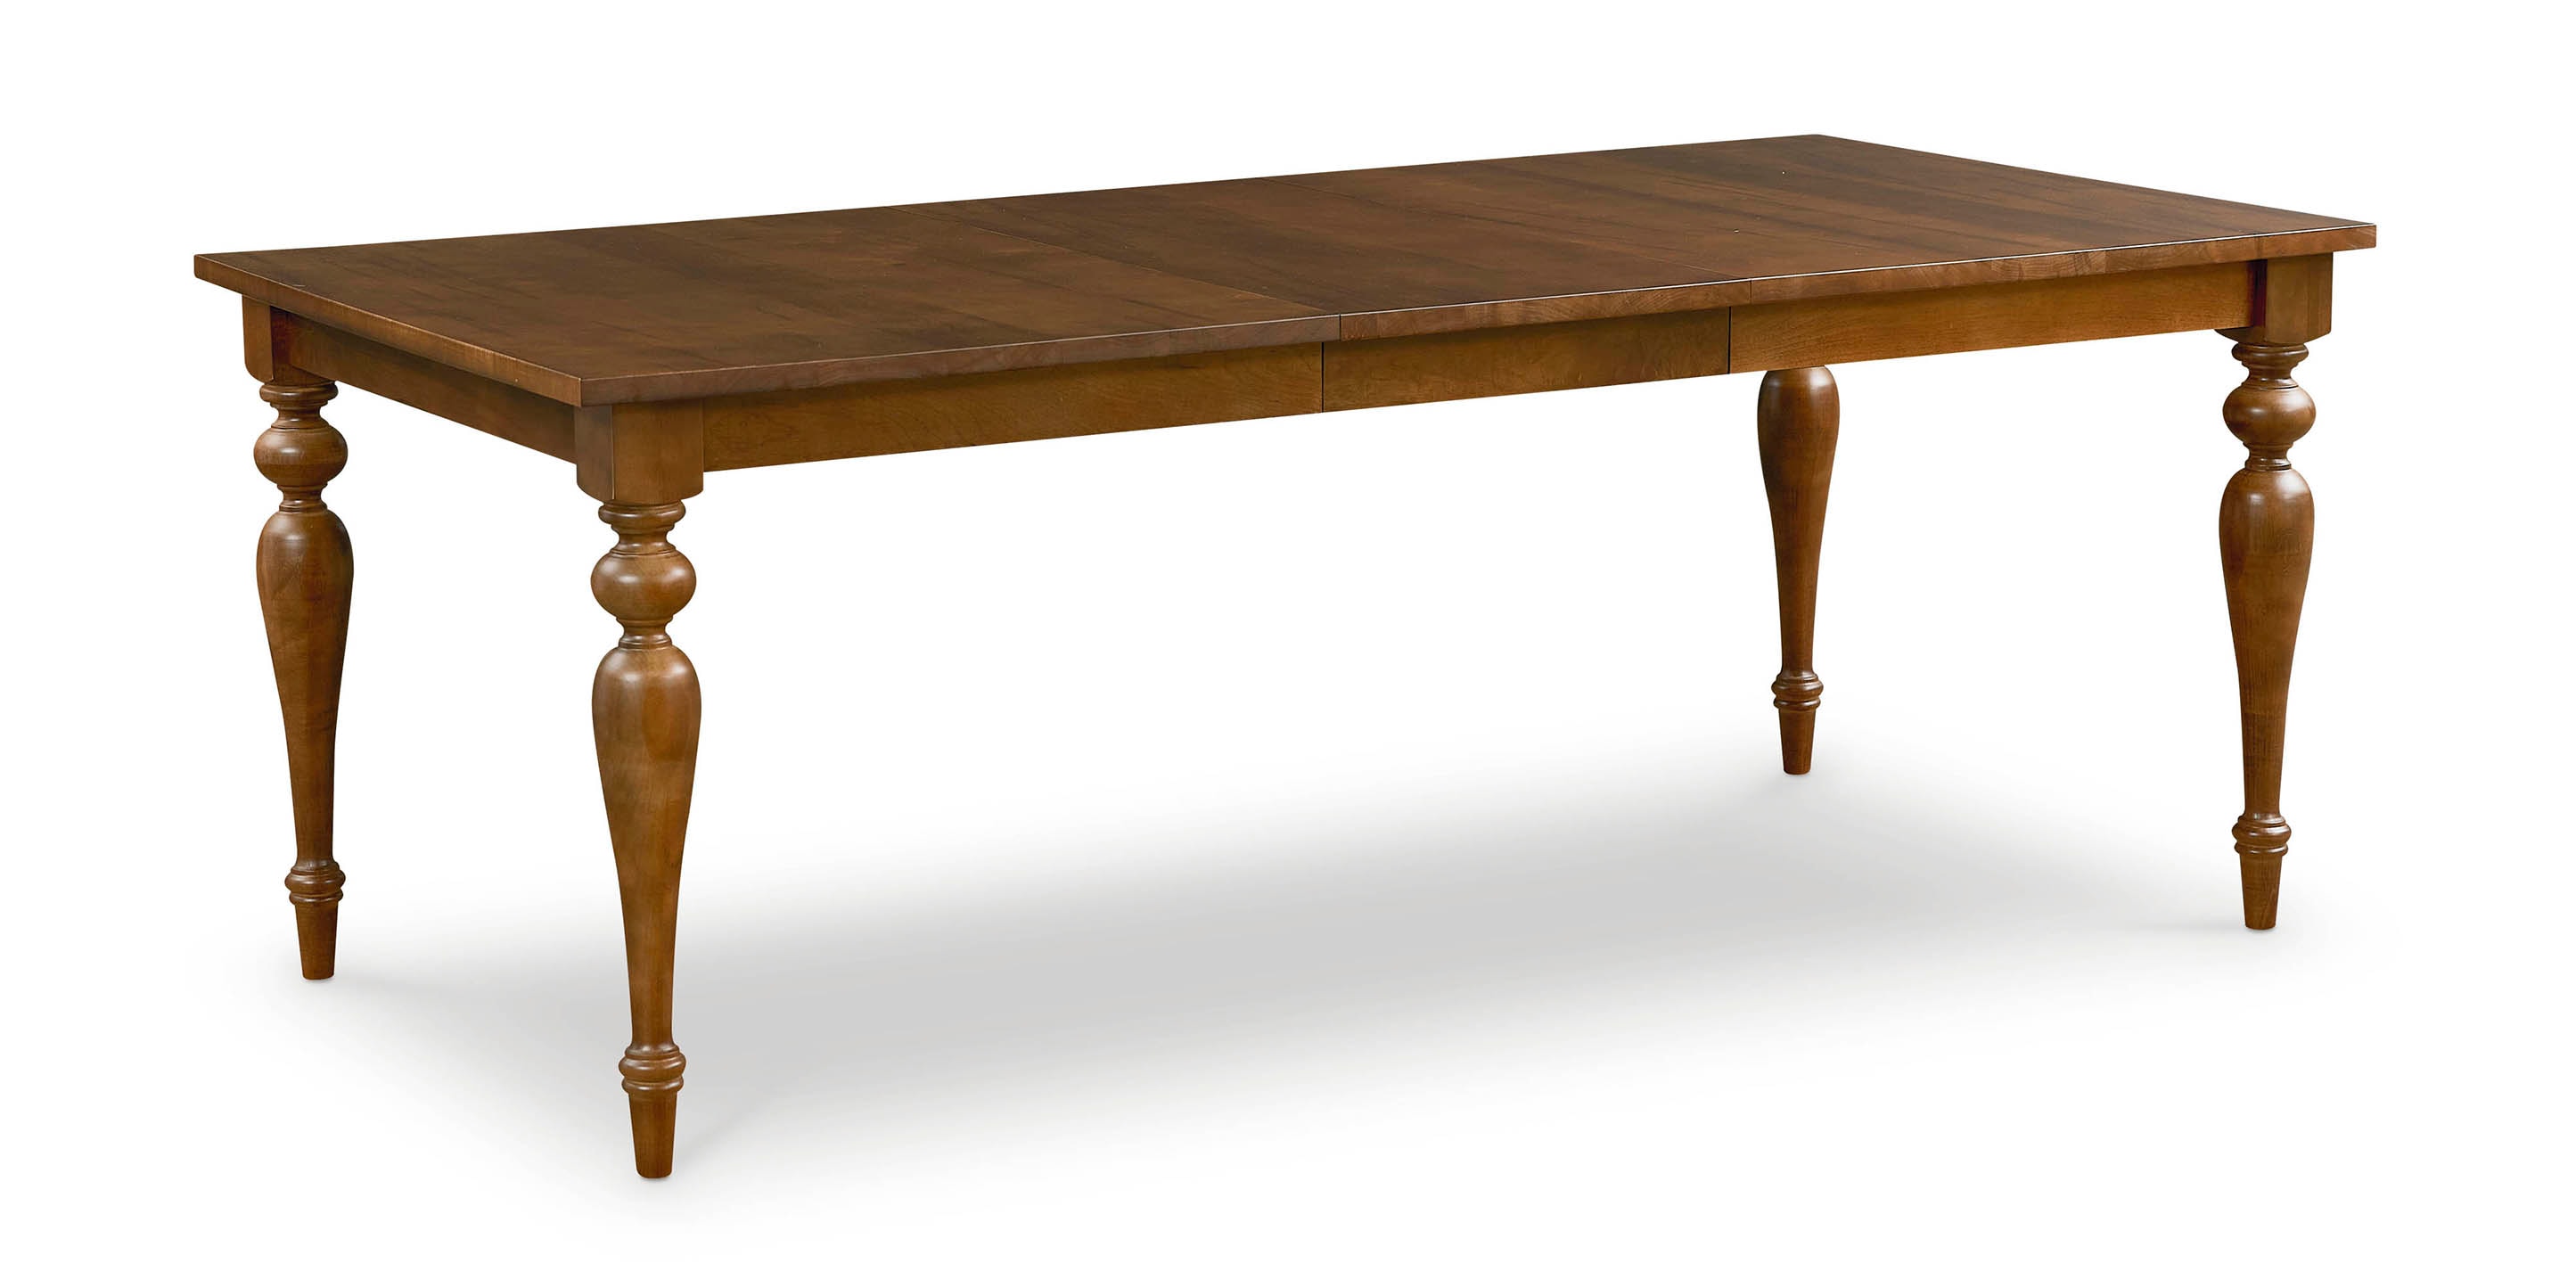 Amelia Maple Dining Table